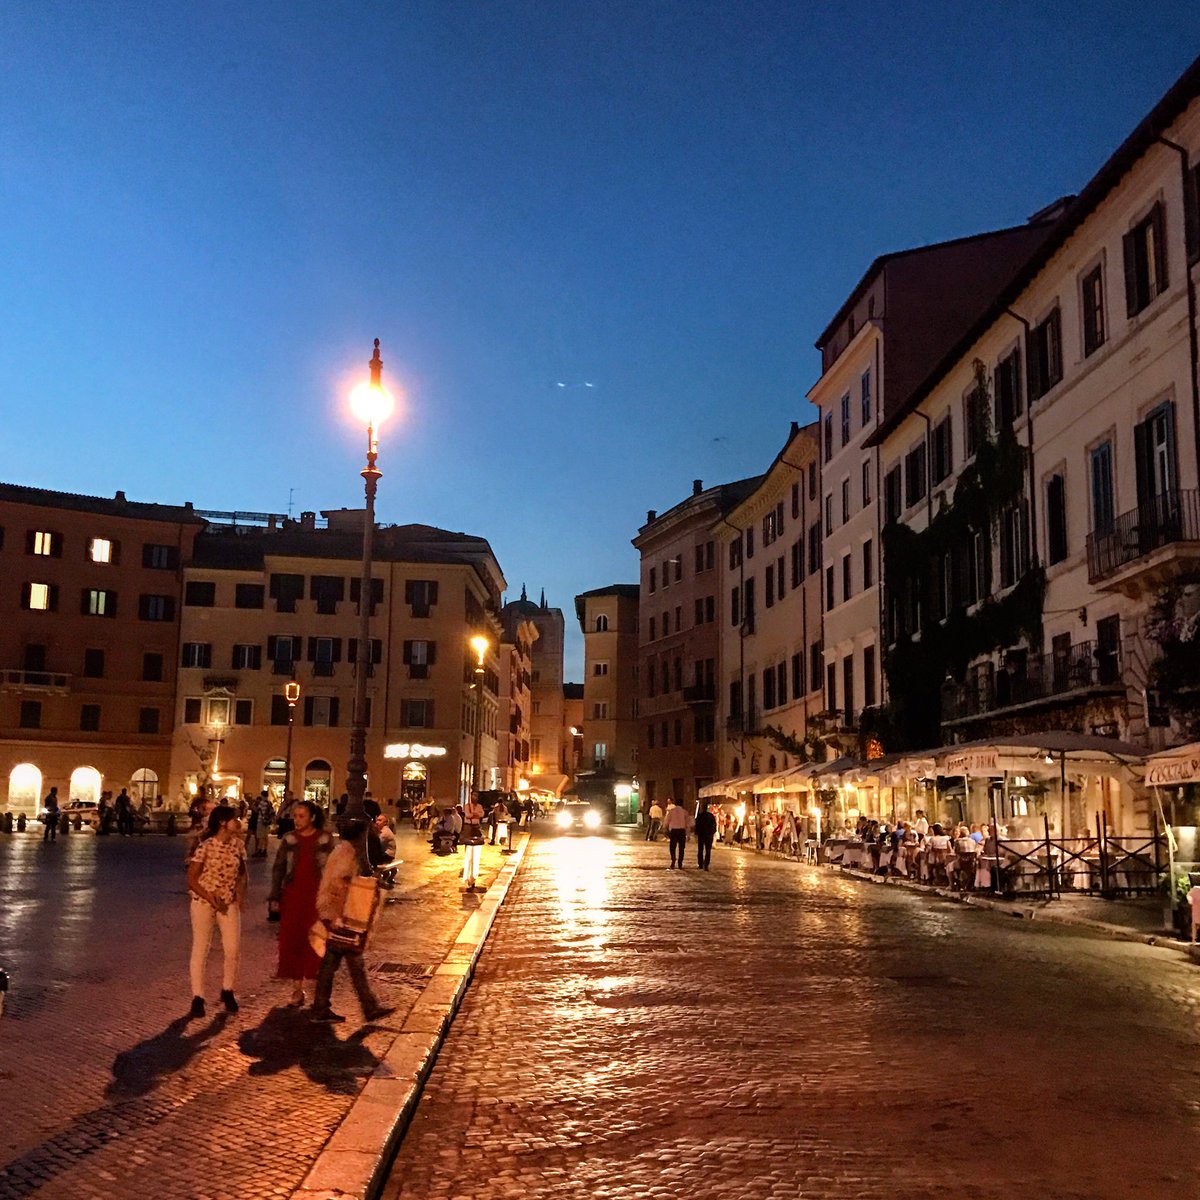 The haunt of my dreams ❤️ #piazzas #cittaeterna #magicalevenings #twilight #streetsofrome #travelblog #mydailyrome